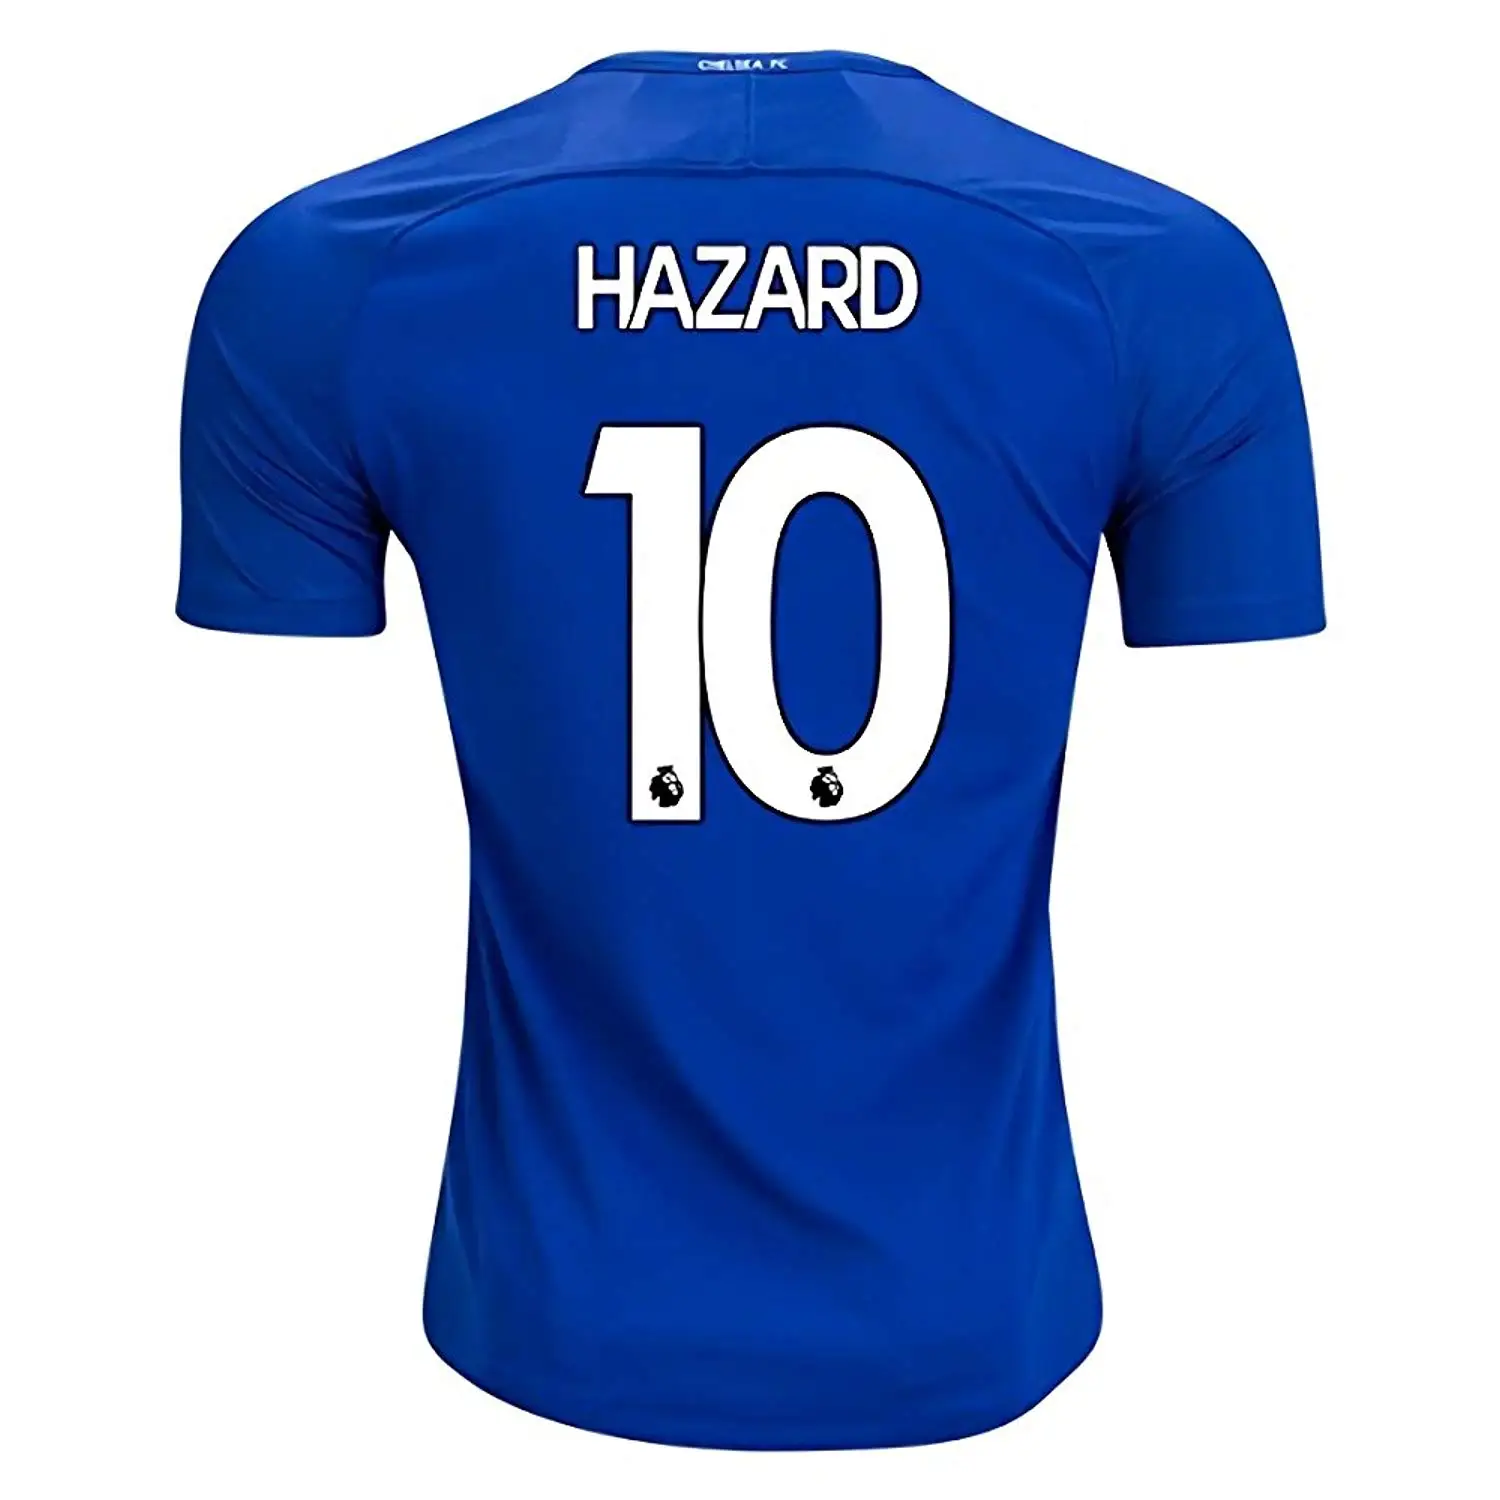 Buy Hazard #10 Chelsea Third Soccer Jersey 2015/2016 in Cheap Price on ...